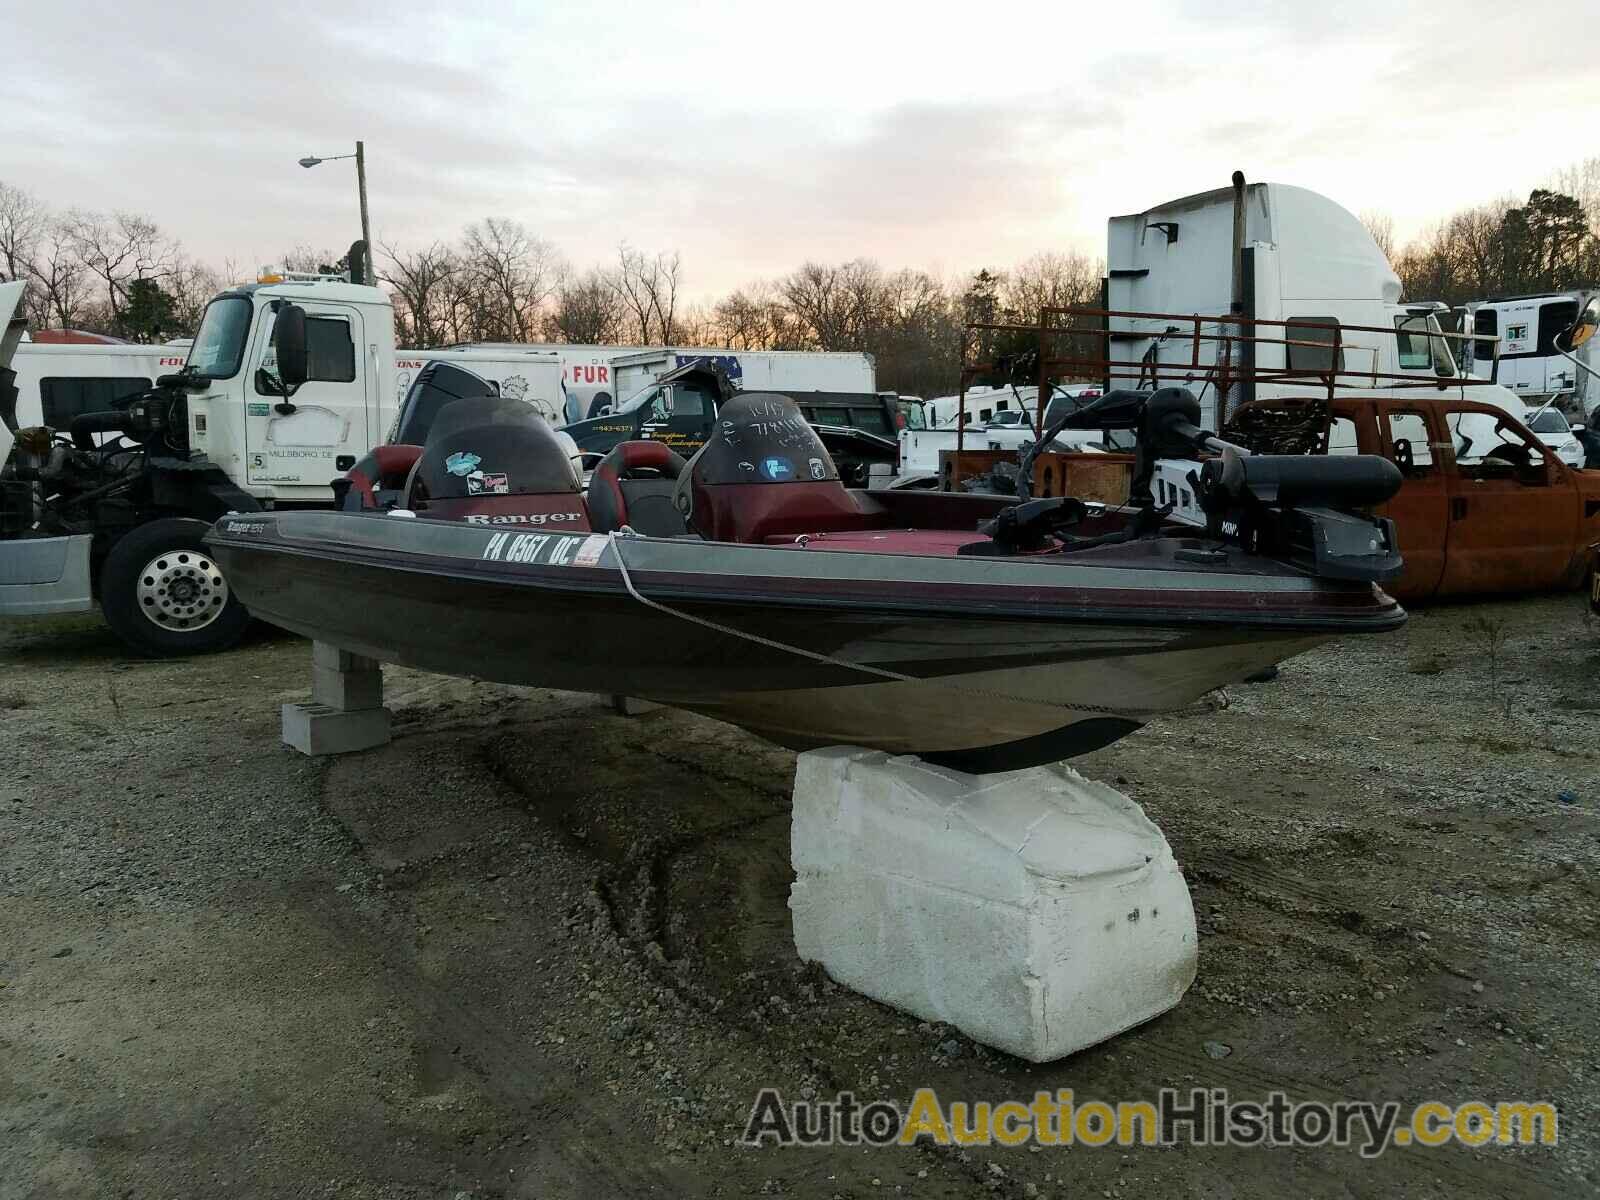 2003 LAND ROVER BOAT, RNG6W203B303